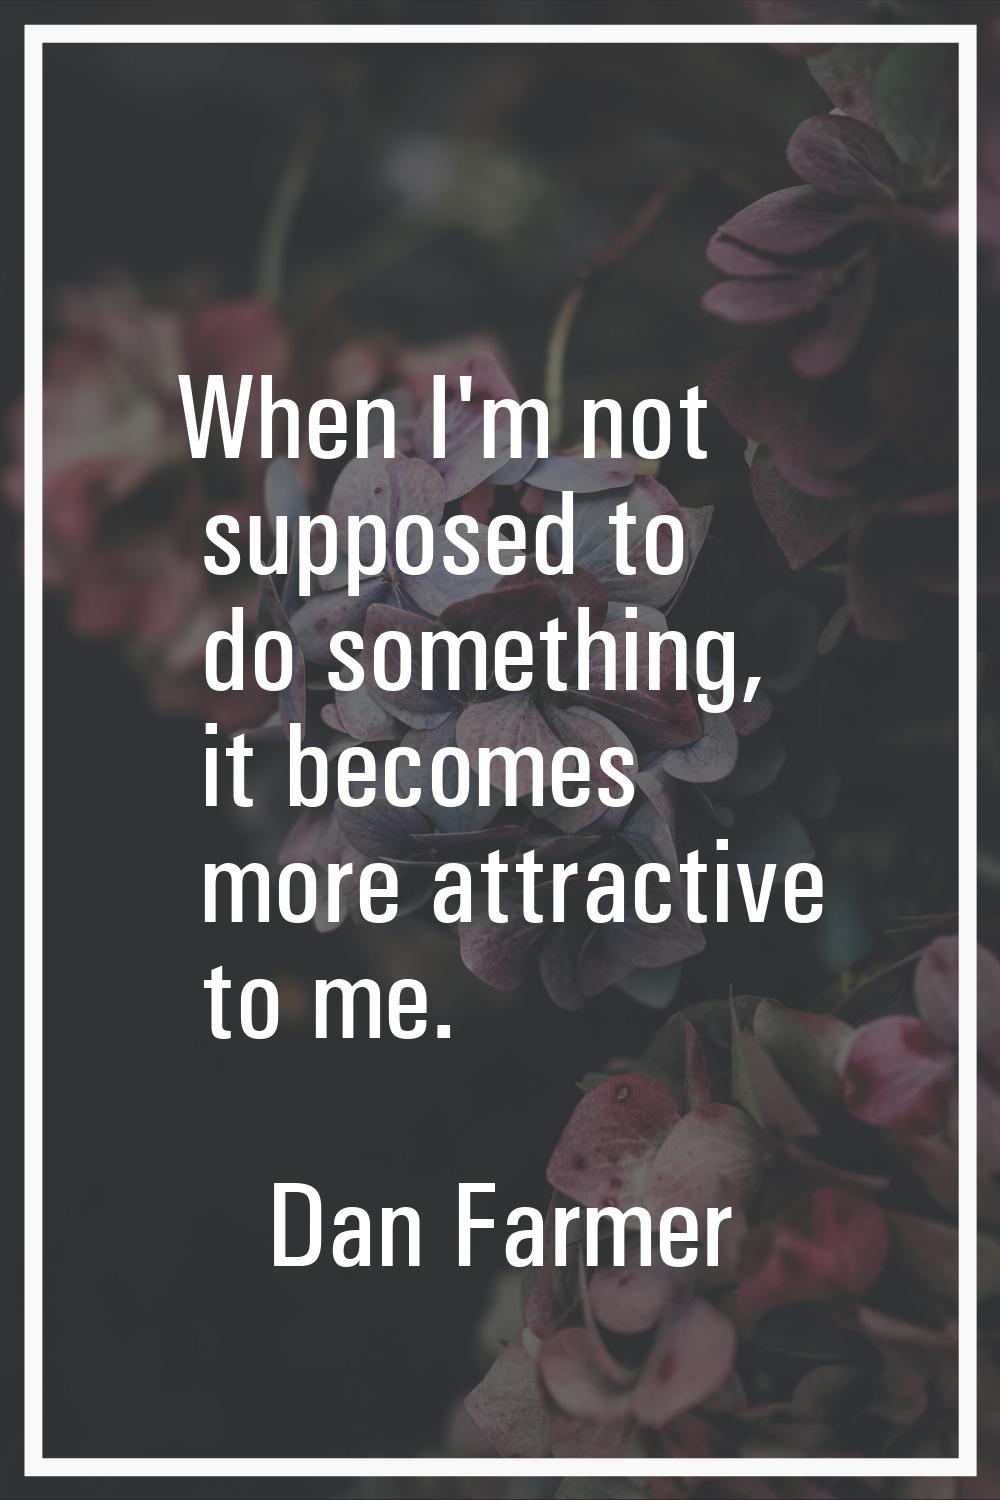 When I'm not supposed to do something, it becomes more attractive to me.